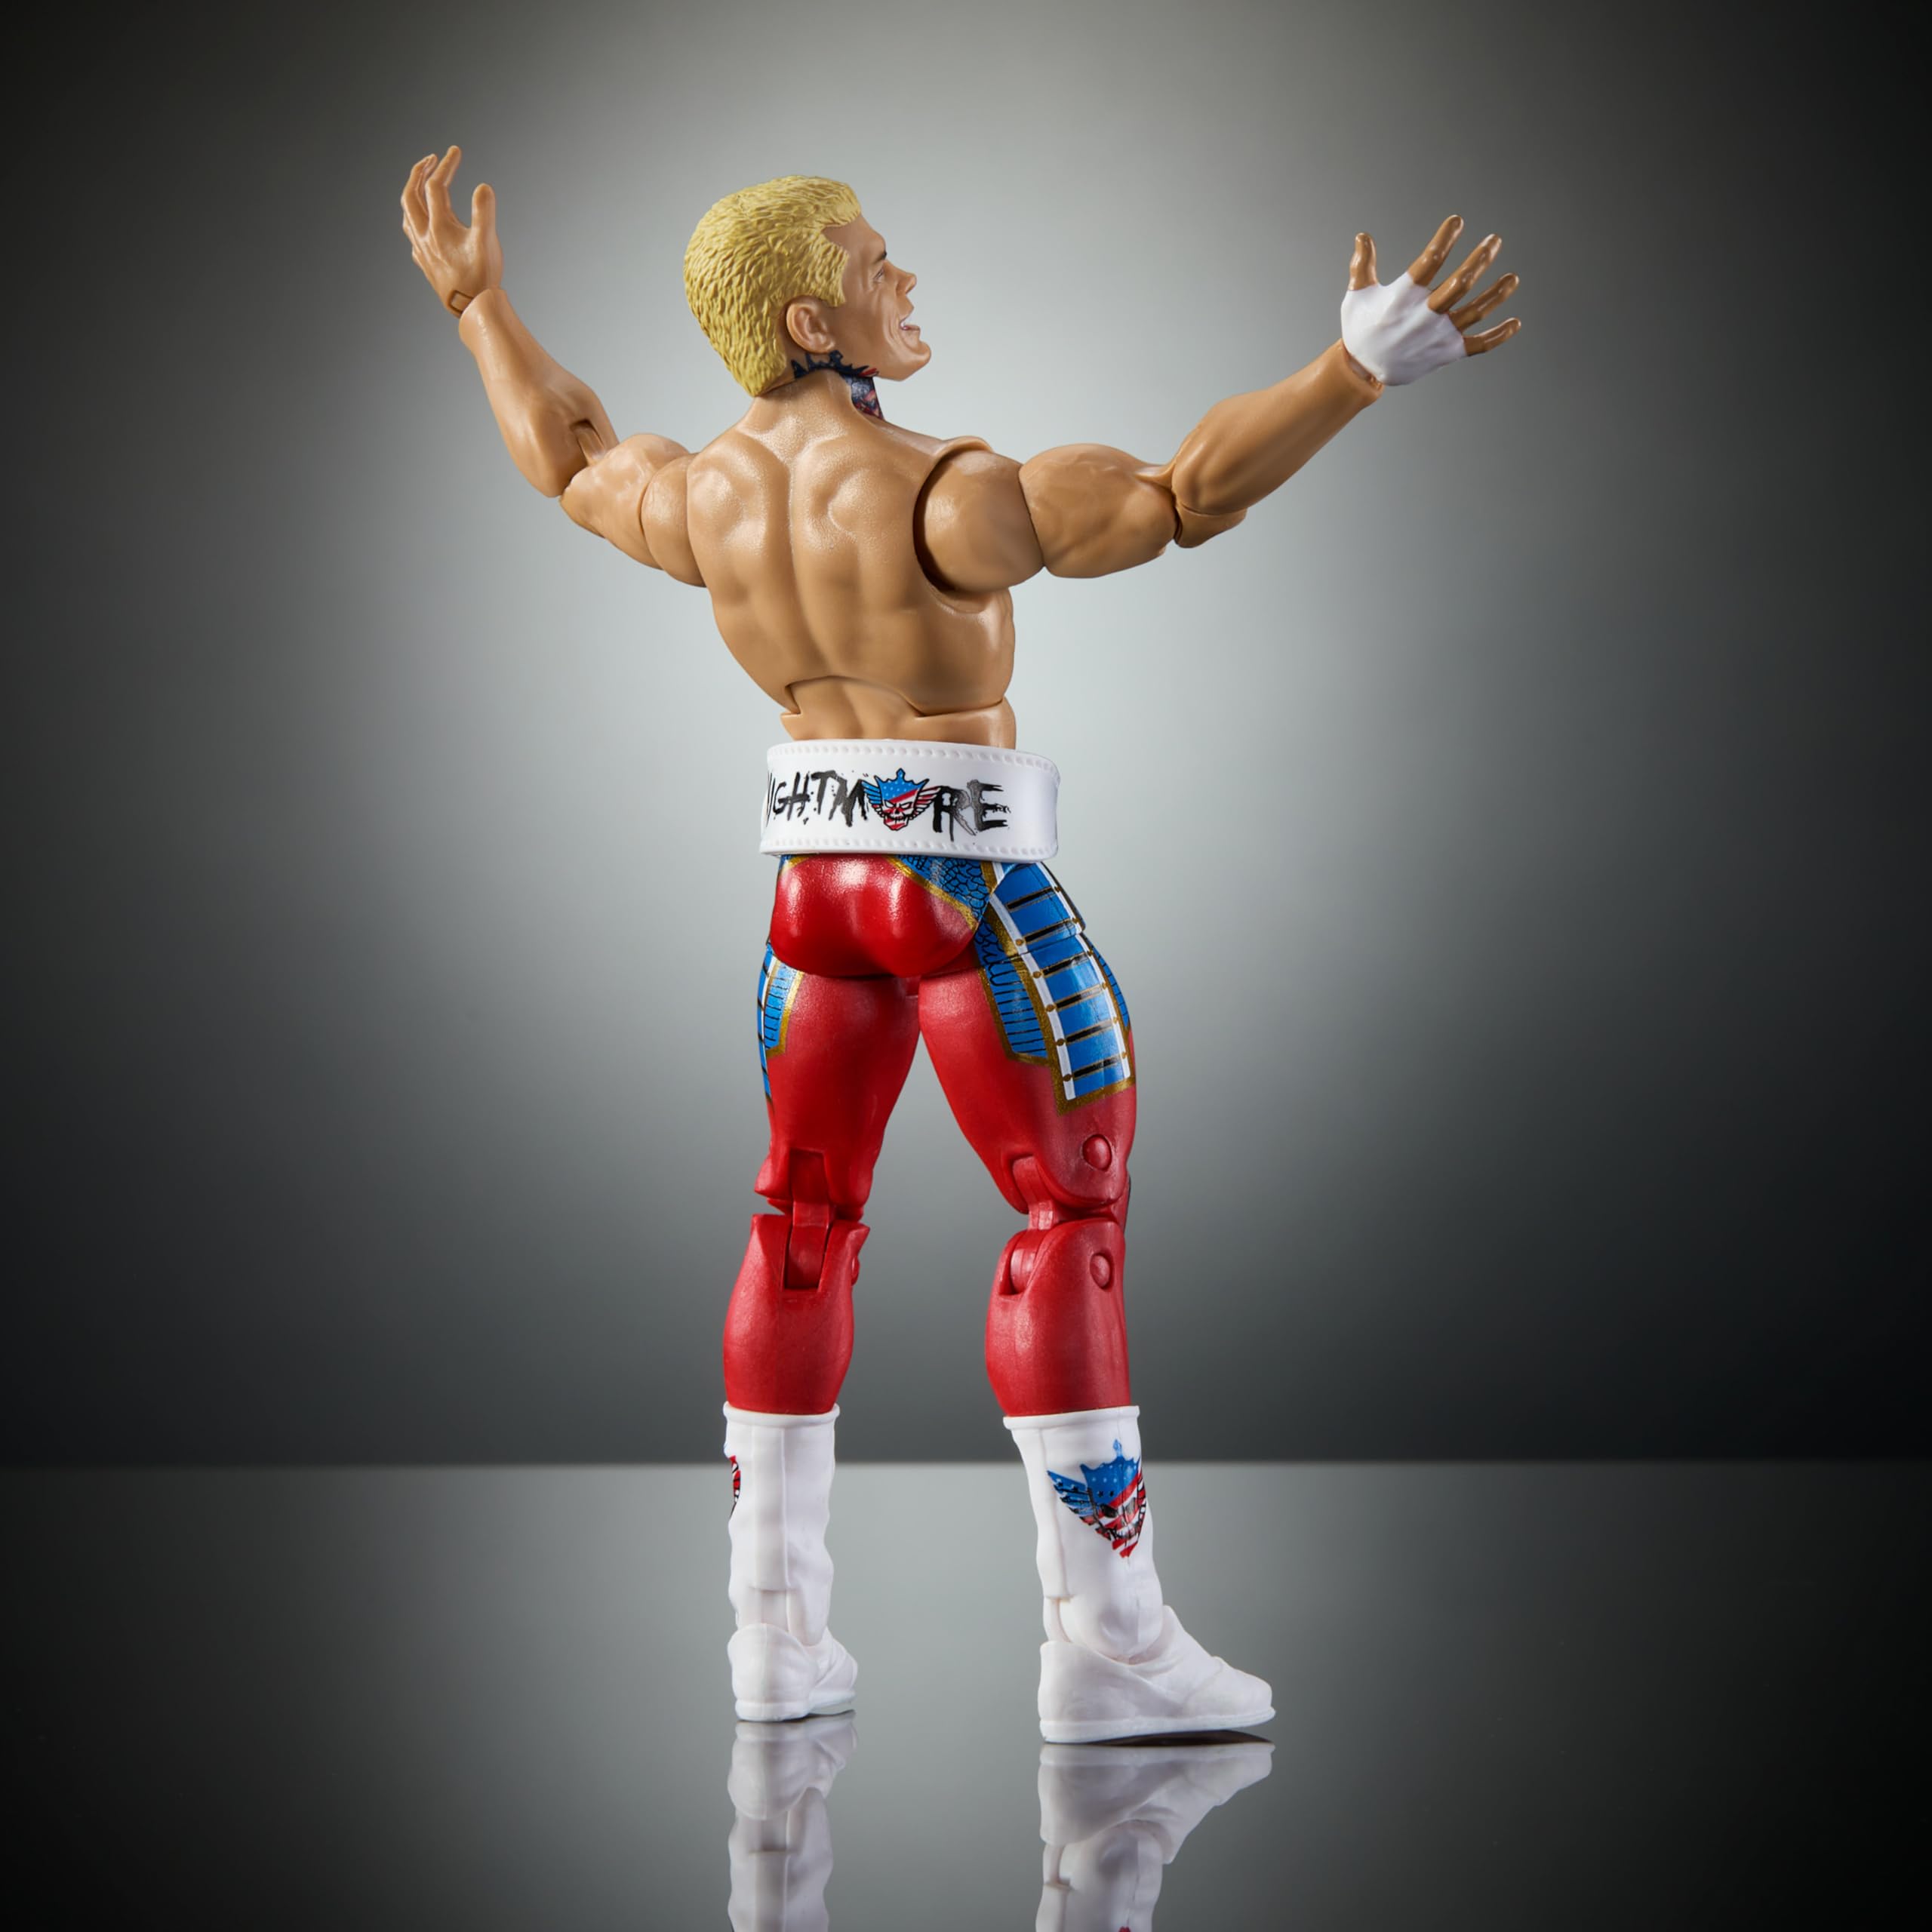 ​WWE Top Picks Elite Action Figure & Accessories Set, “The American Nightmare” Cody Rhodes 6-inch Collectible with Swappable Hands, Ring Gear & 25 Articulation Points​